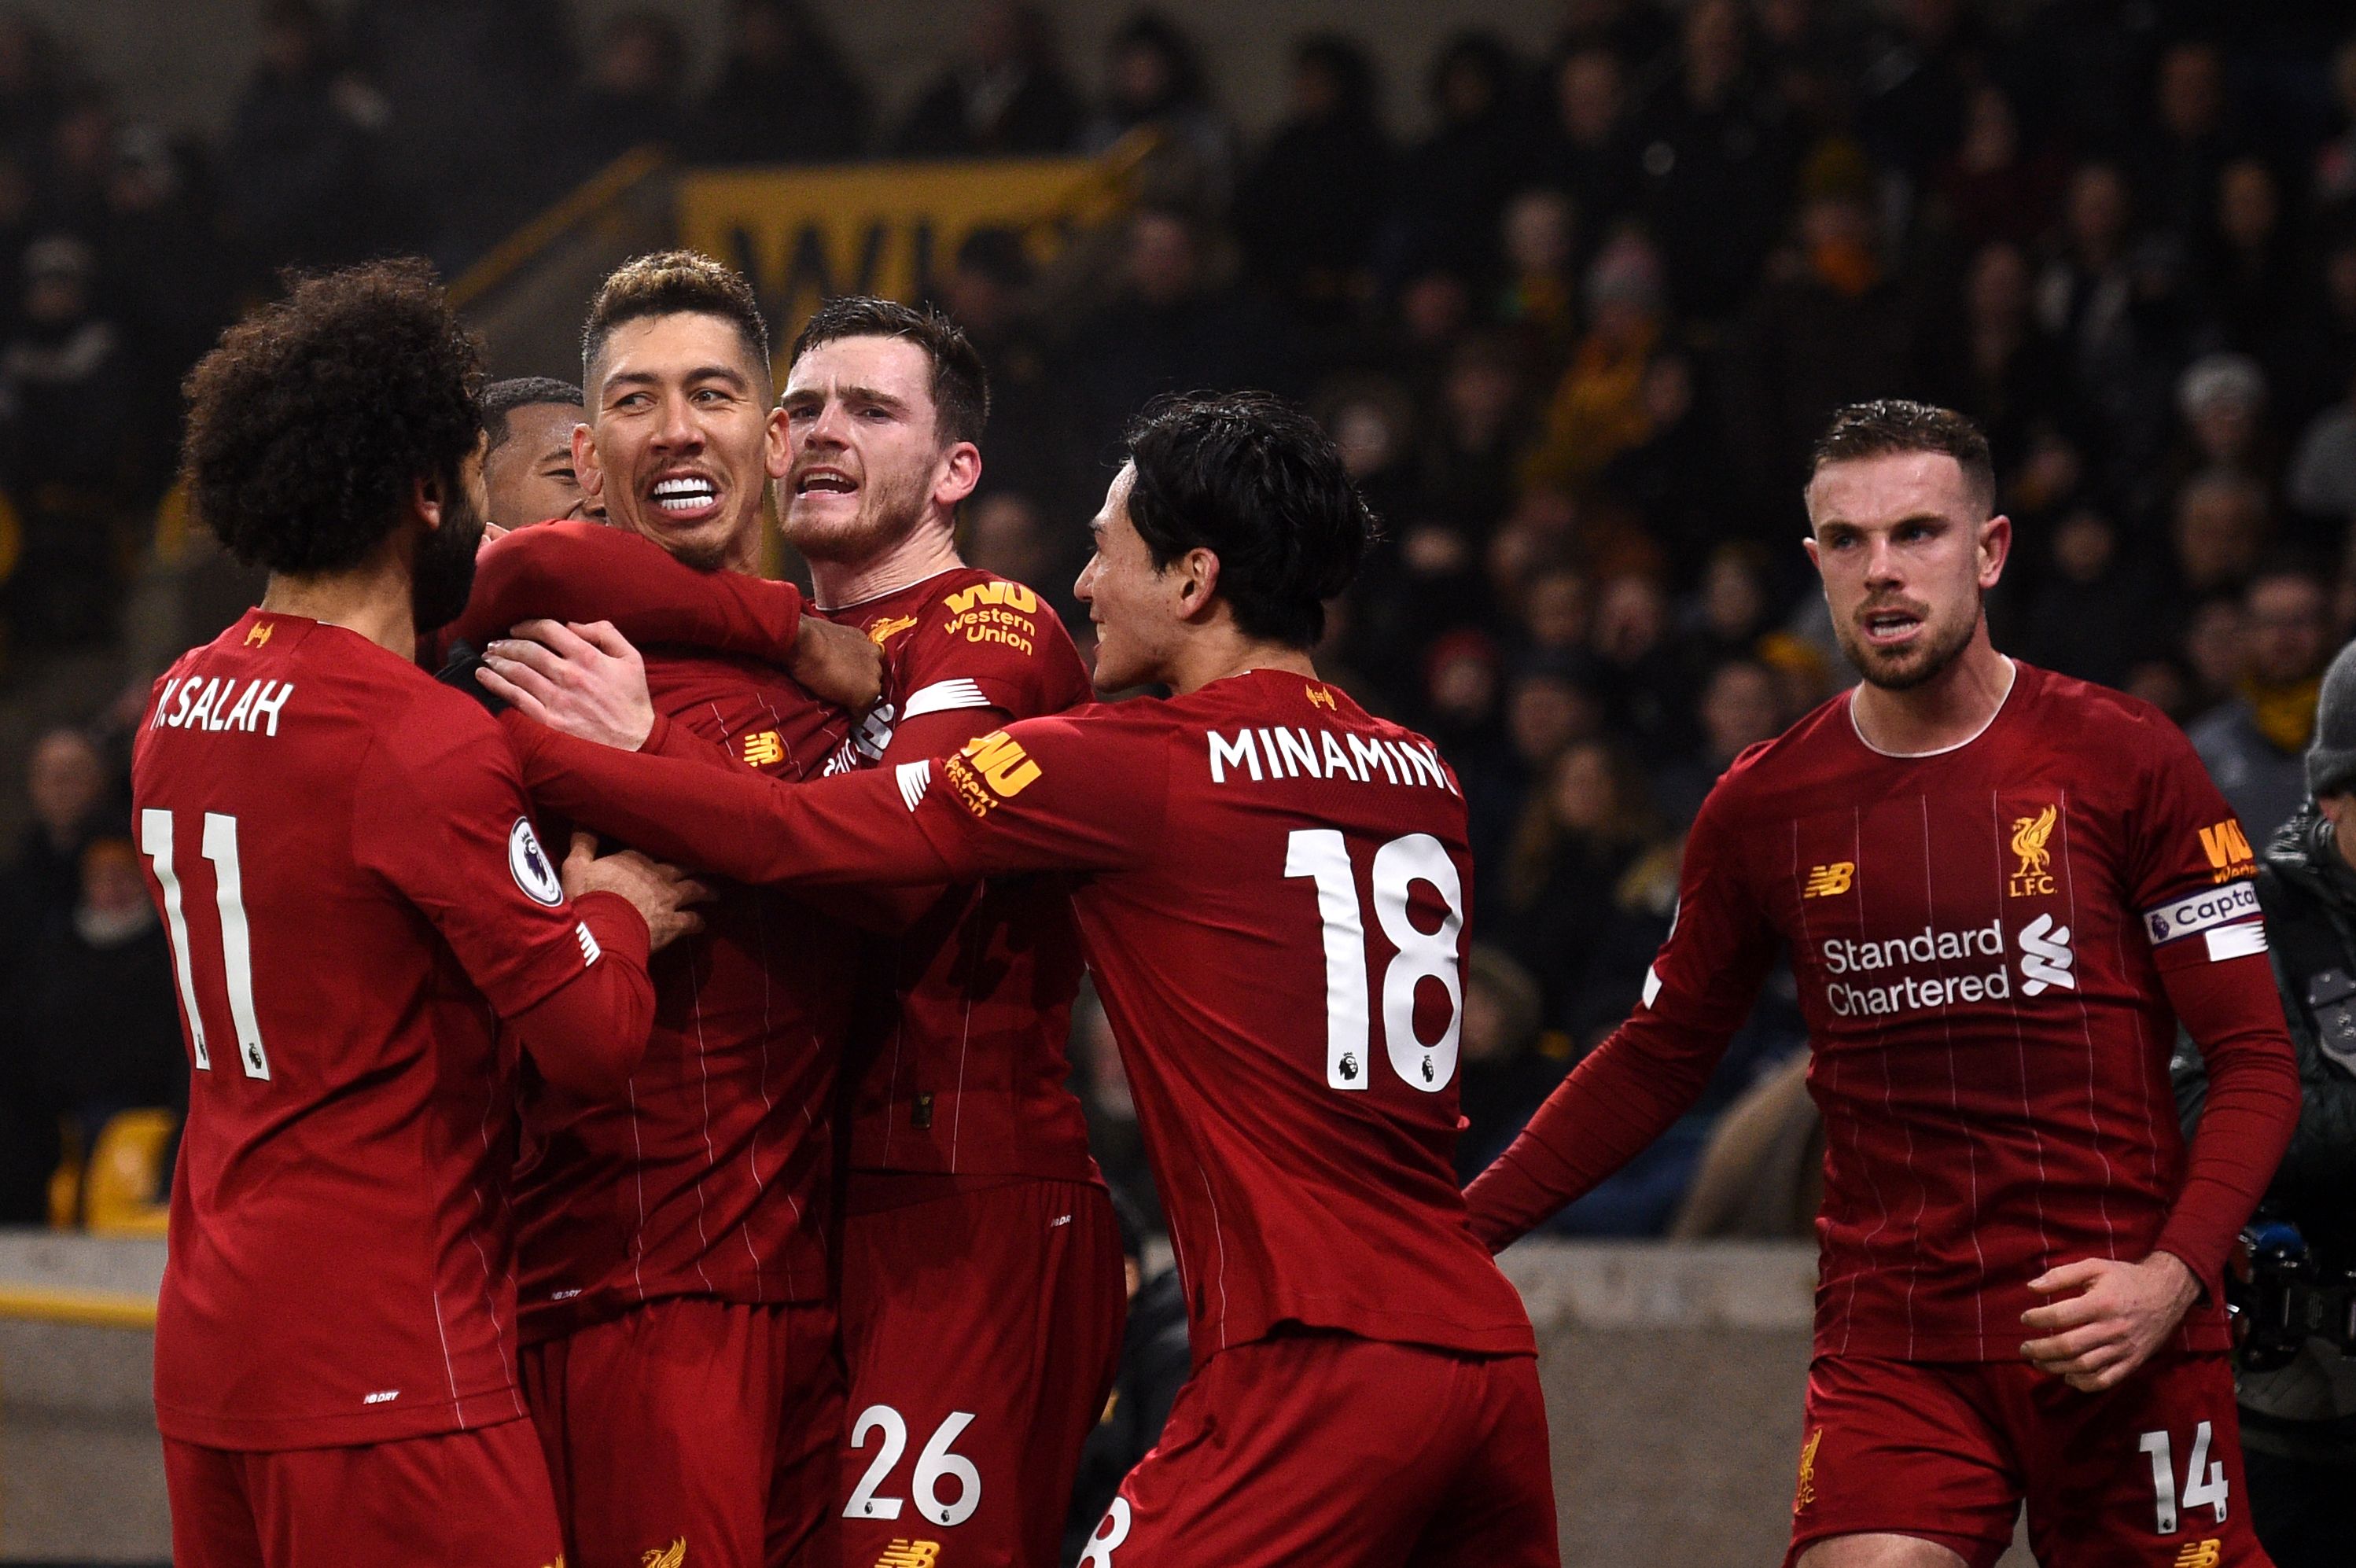 Liverpool's Brazilian midfielder Roberto Firmino (CL)  celebrates with teammates after he scores the team's second goal during the English Premier League football match between Wolverhampton Wanderers and Liverpool at the Molineux stadium in Wolverhampton, central England on January 23, 2020. (Photo by Oli SCARFF / AFP) / RESTRICTED TO EDITORIAL USE. No use with unauthorized audio, video, data, fixture lists, club/league logos or 'live' services. Online in-match use limited to 120 images. An additional 40 images may be used in extra time. No video emulation. Social media in-match use limited to 120 images. An additional 40 images may be used in extra time. No use in betting publications, games or single club/league/player publications. /  (Photo by OLI SCARFF/AFP via Getty Images)